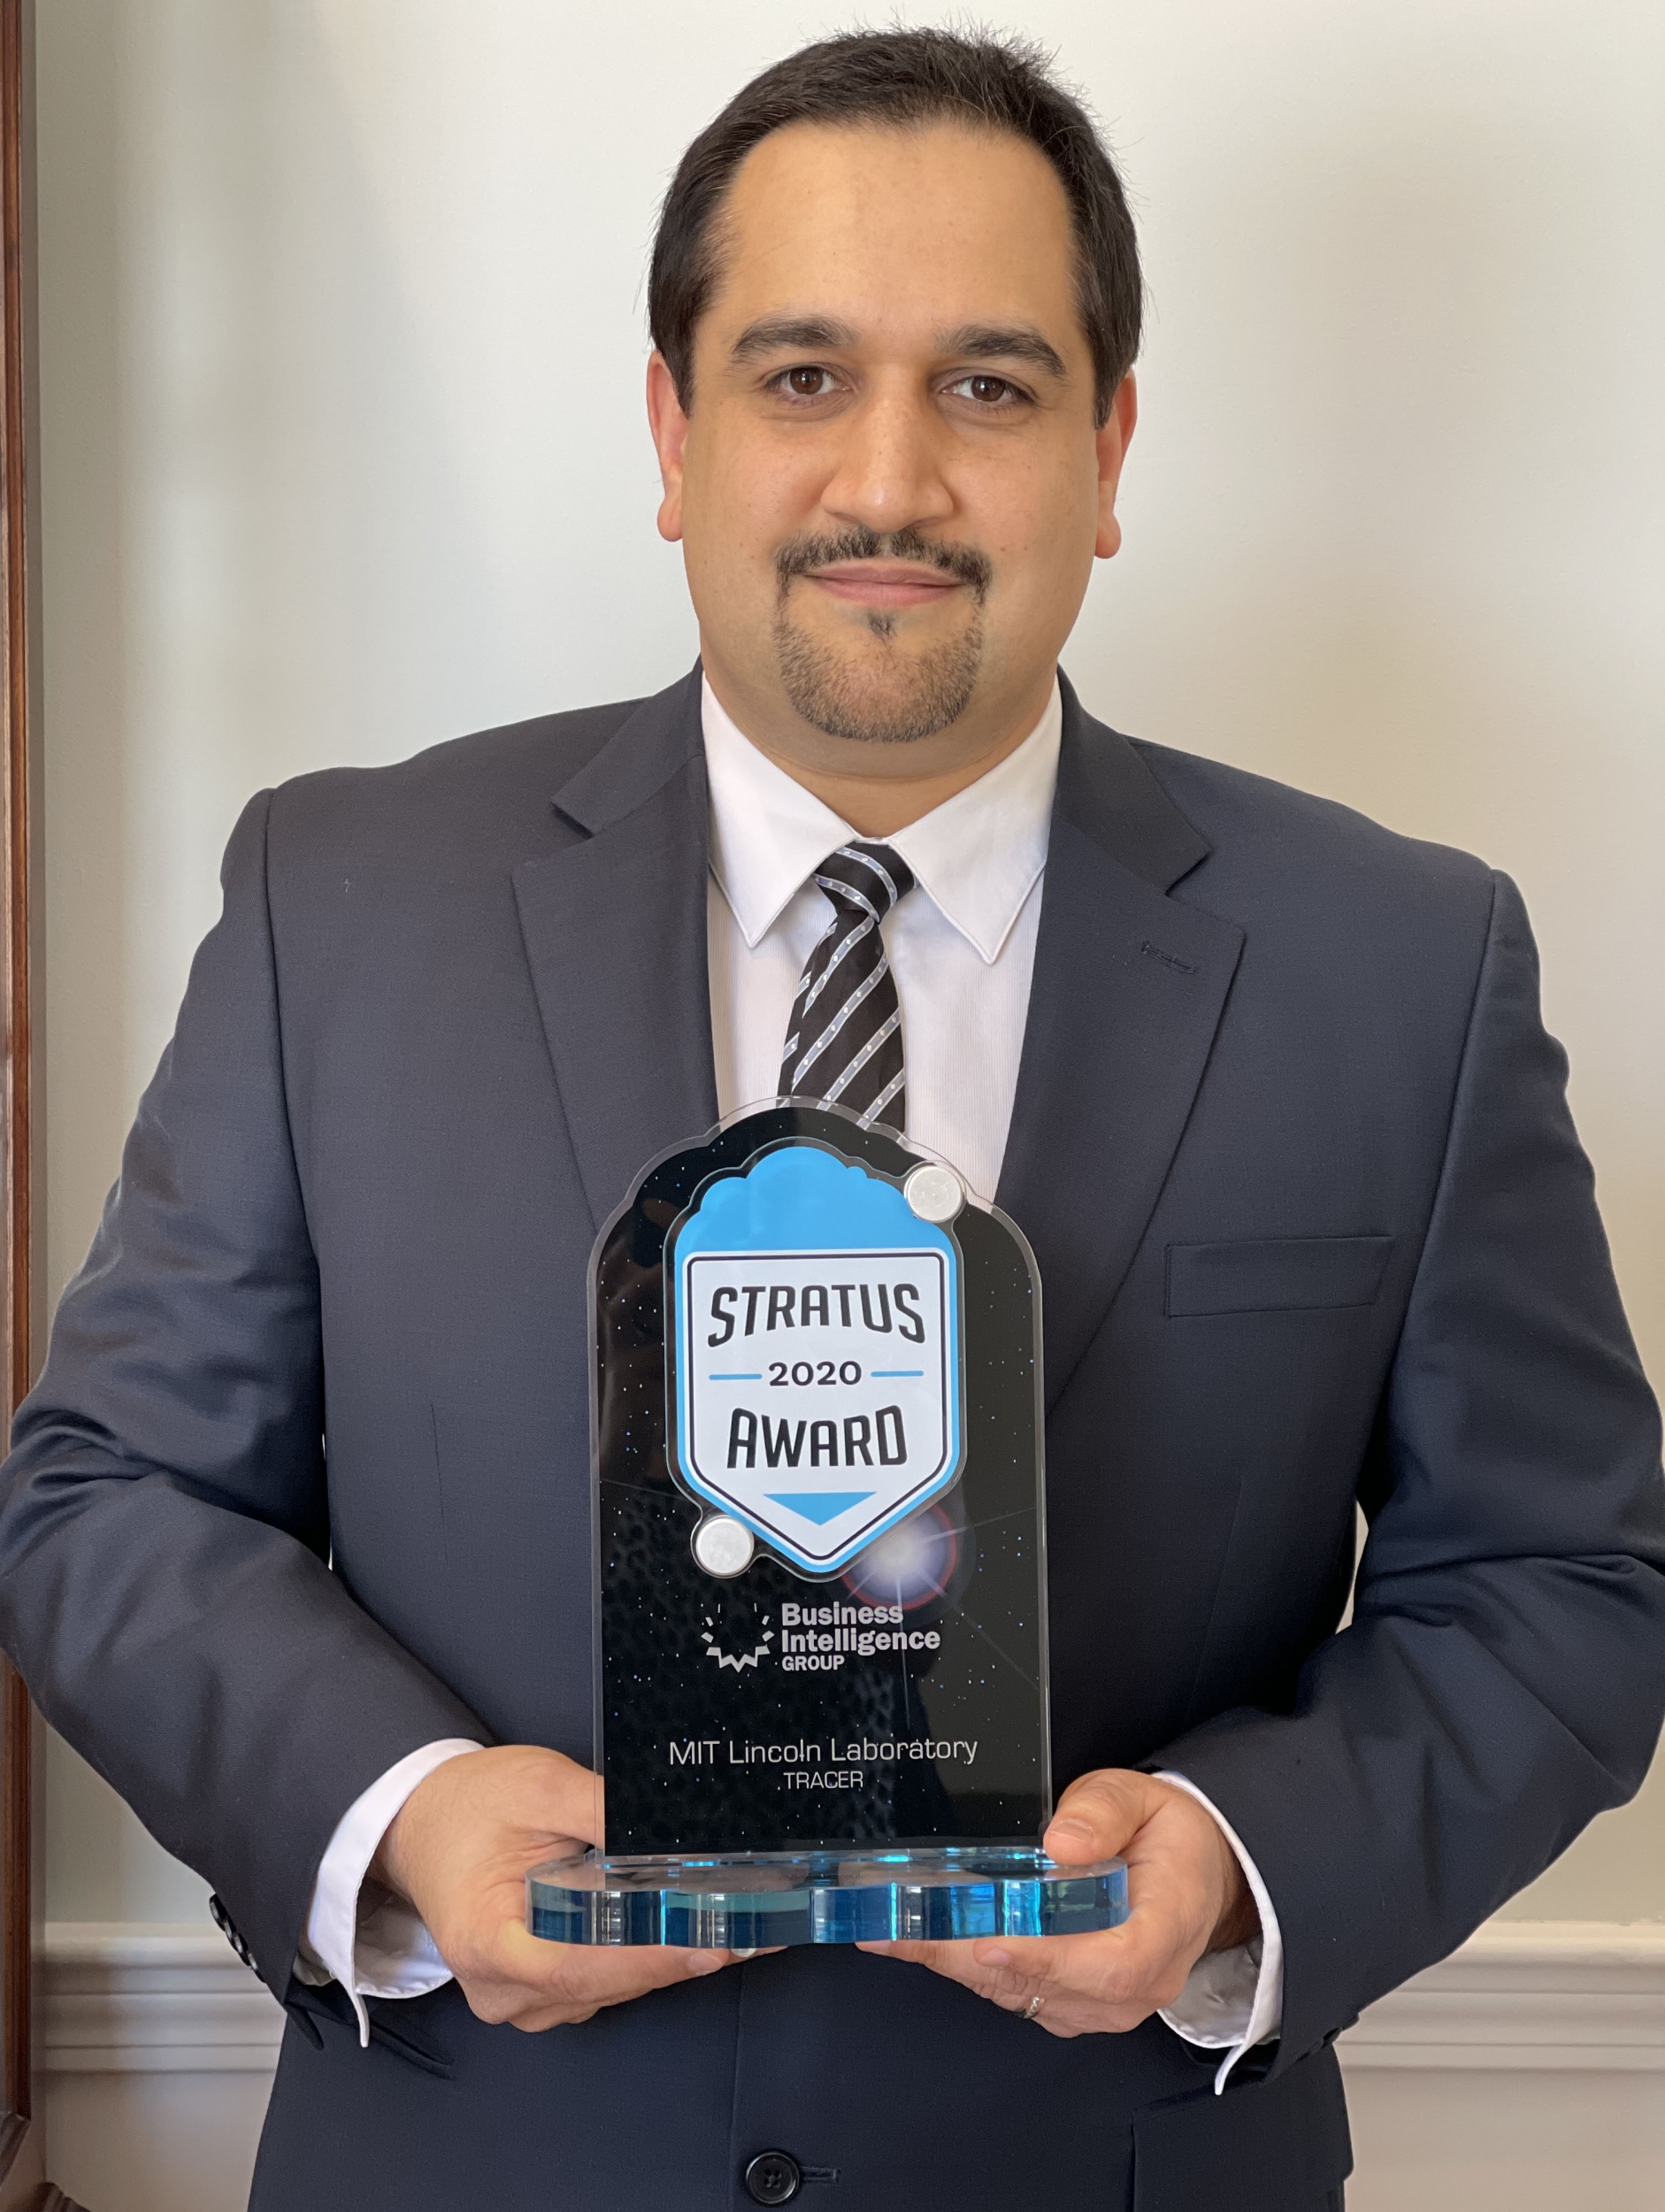 This is a photo of Hamed Okhravi with the Stratus Award trophy.